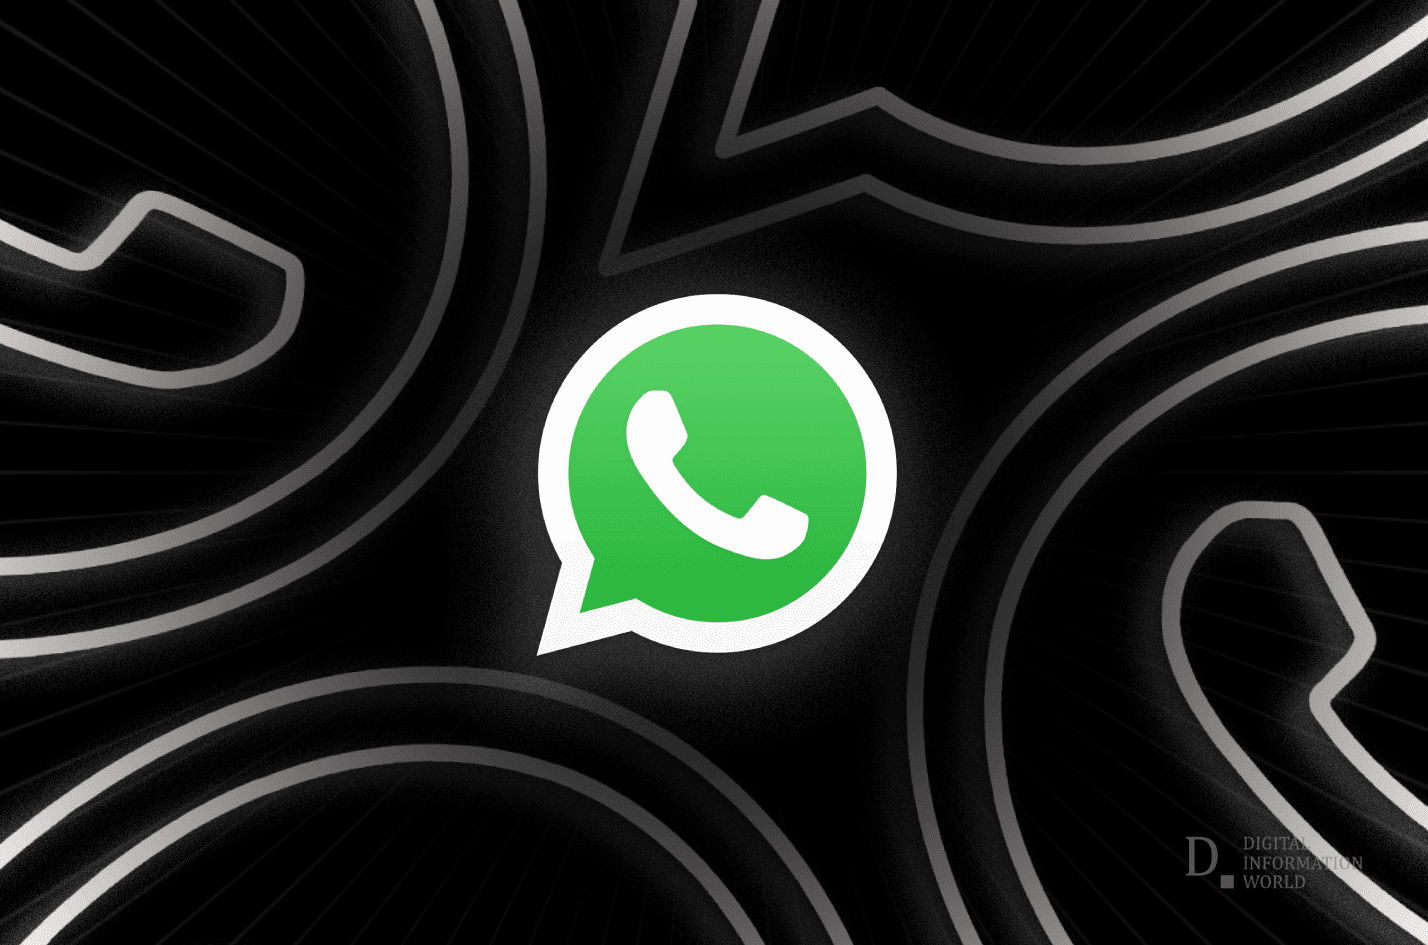 Examples of WhatsApp Channels: Netflix, Times of India, and more